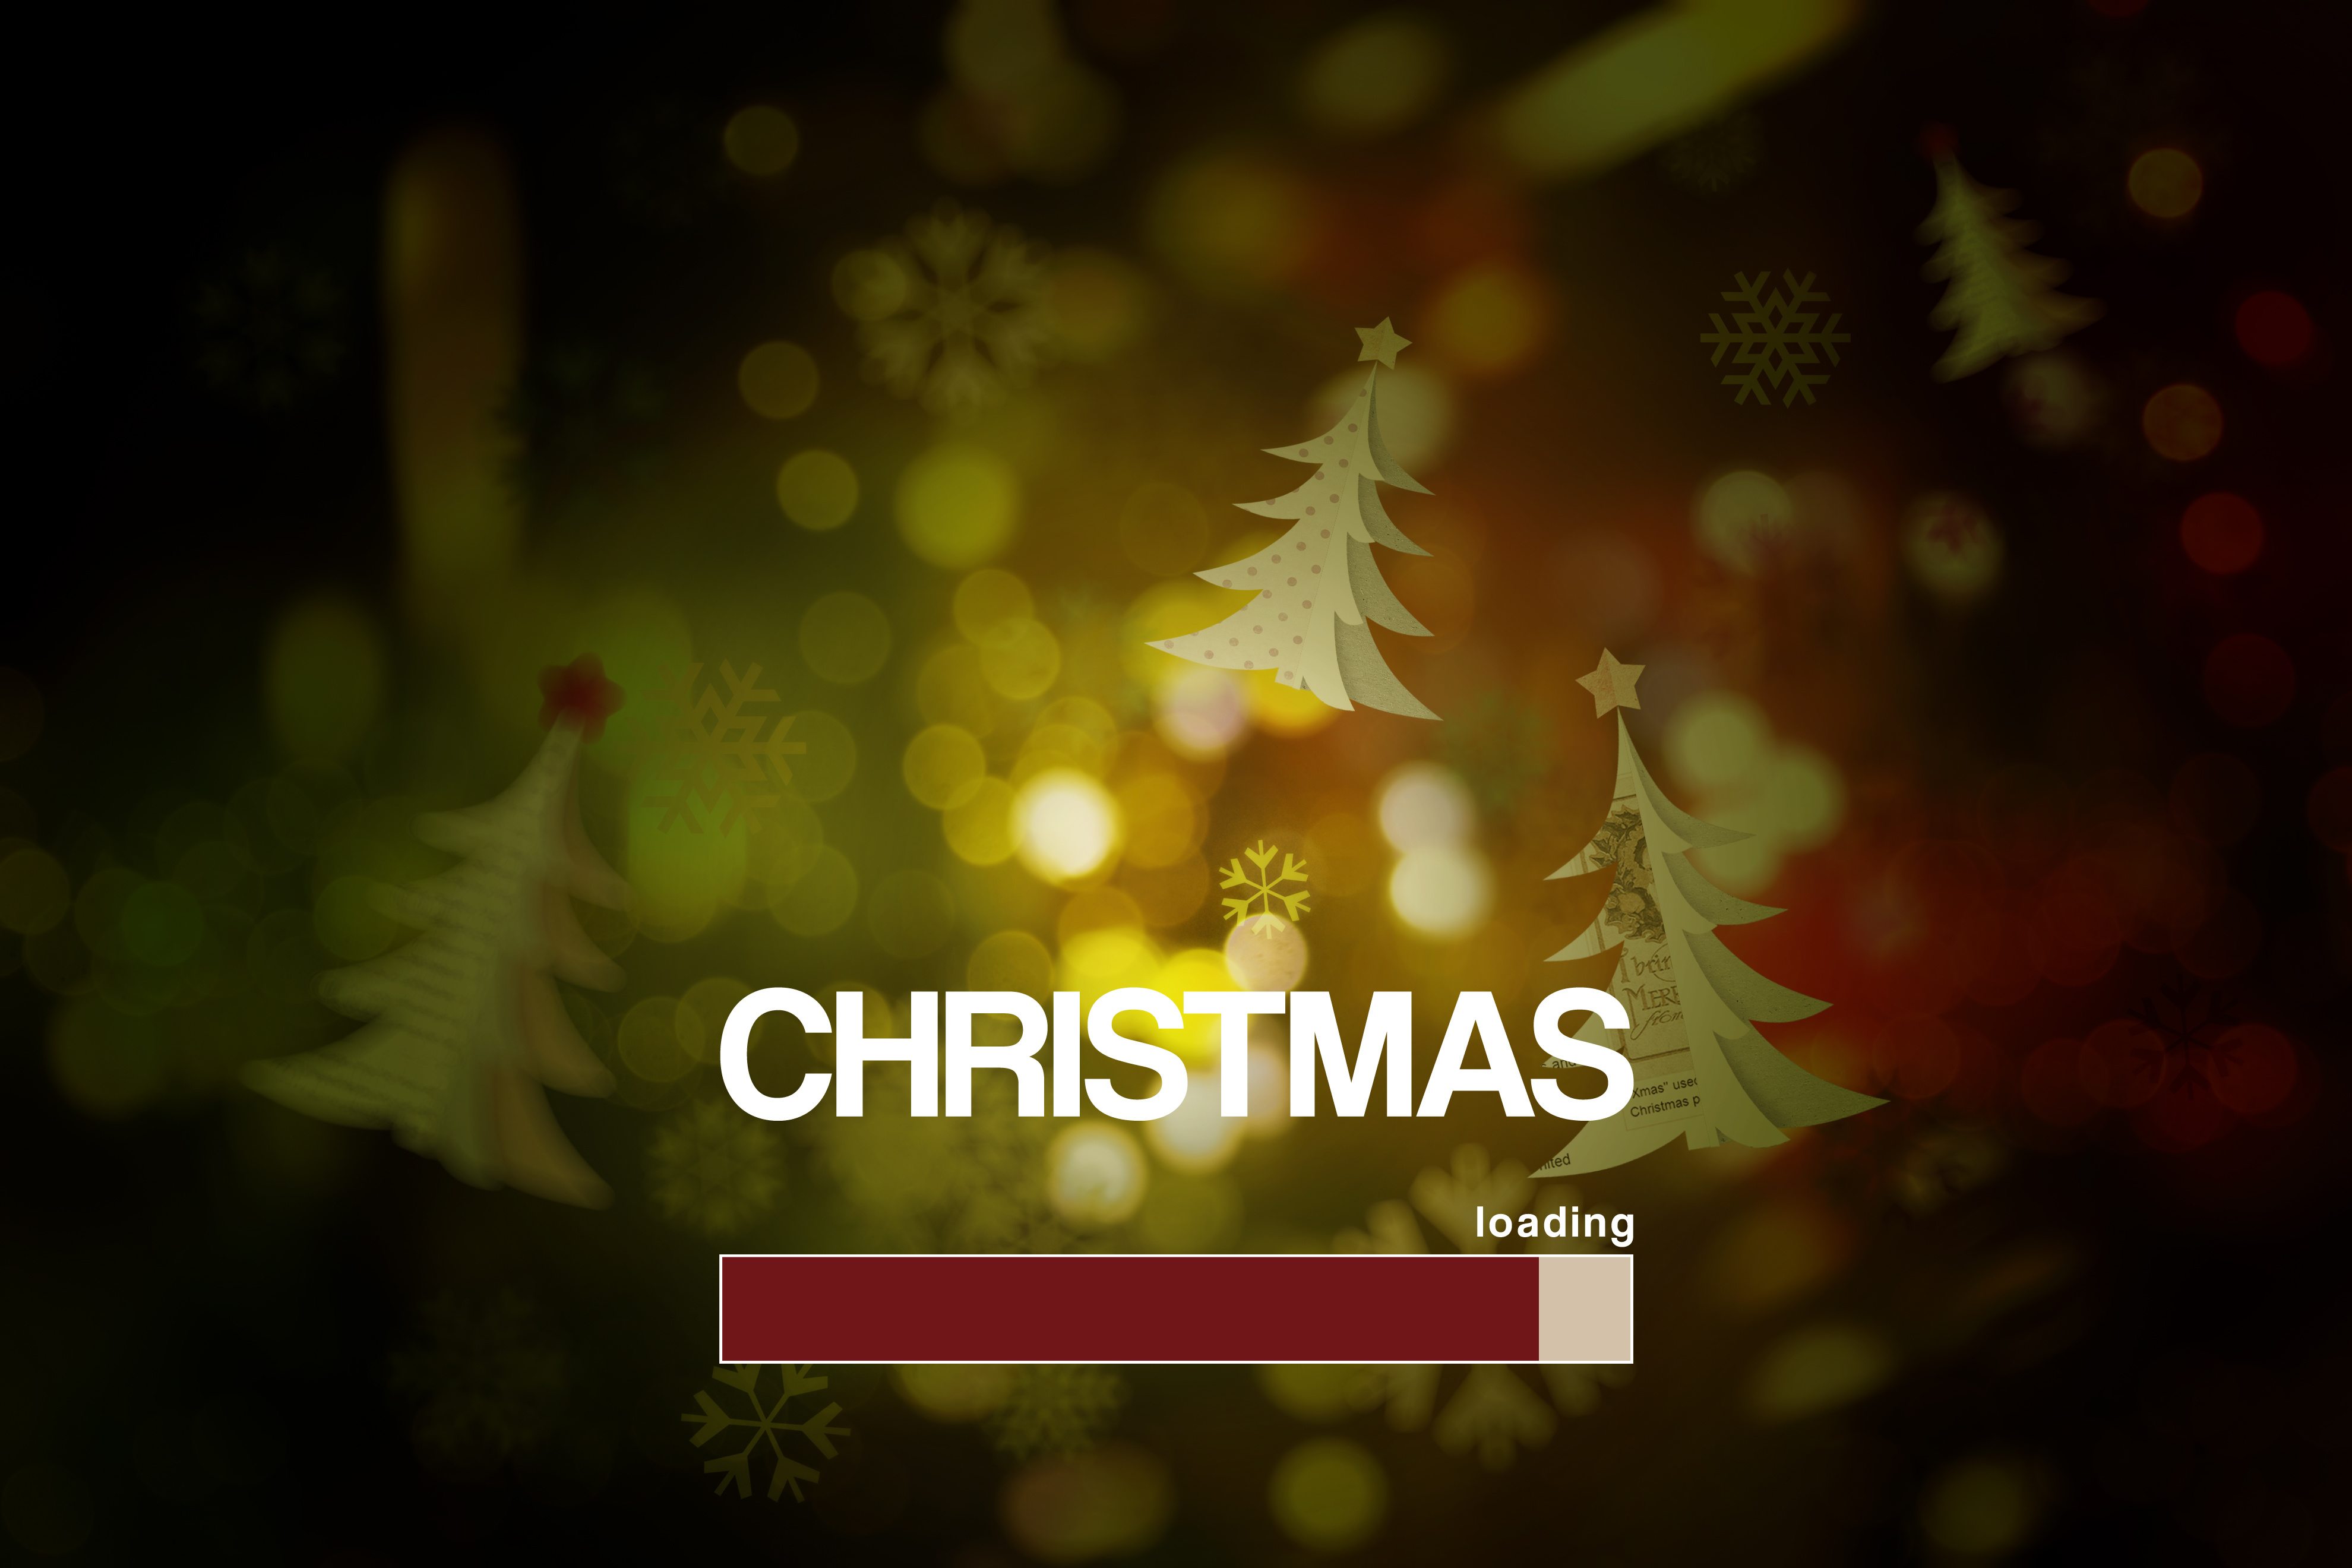 Loading of Christmas .Countdown to Christmas,Background